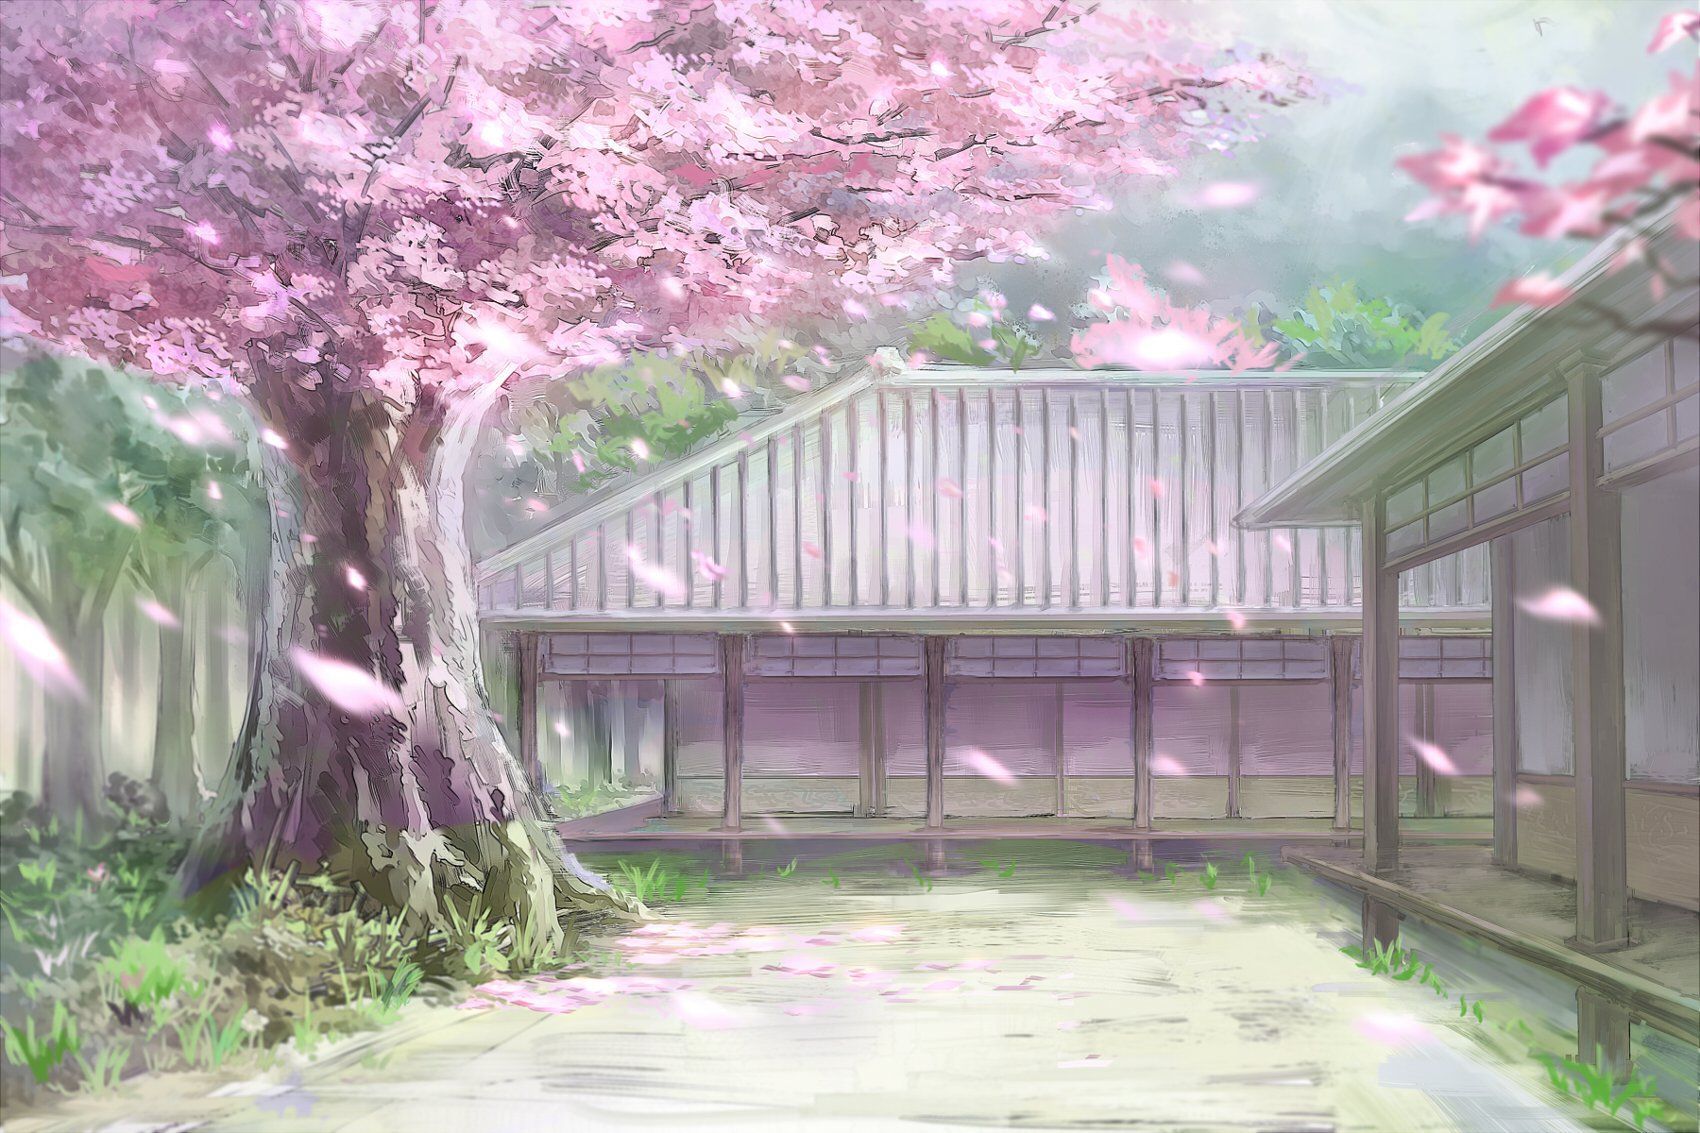 Cherry Blossoms Anime Scenery Wallpaper Free Cherry Blossoms Anime Scenery Background. Anime cherry blossom, Anime scenery, Scenery background